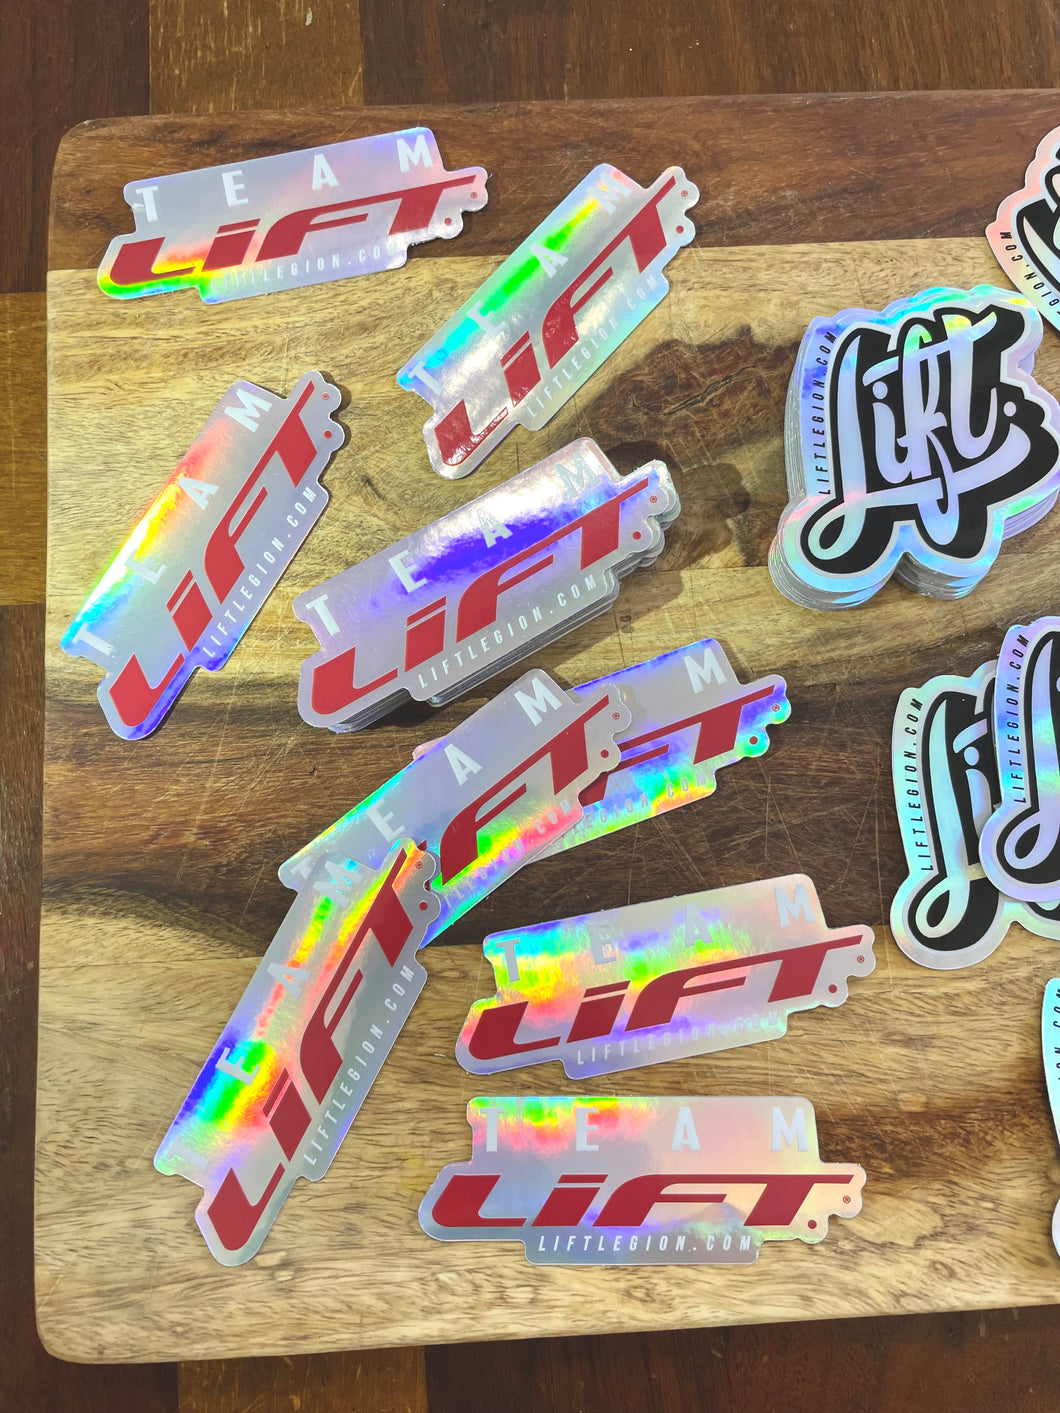 TEAM LIFT. Holographic Decal